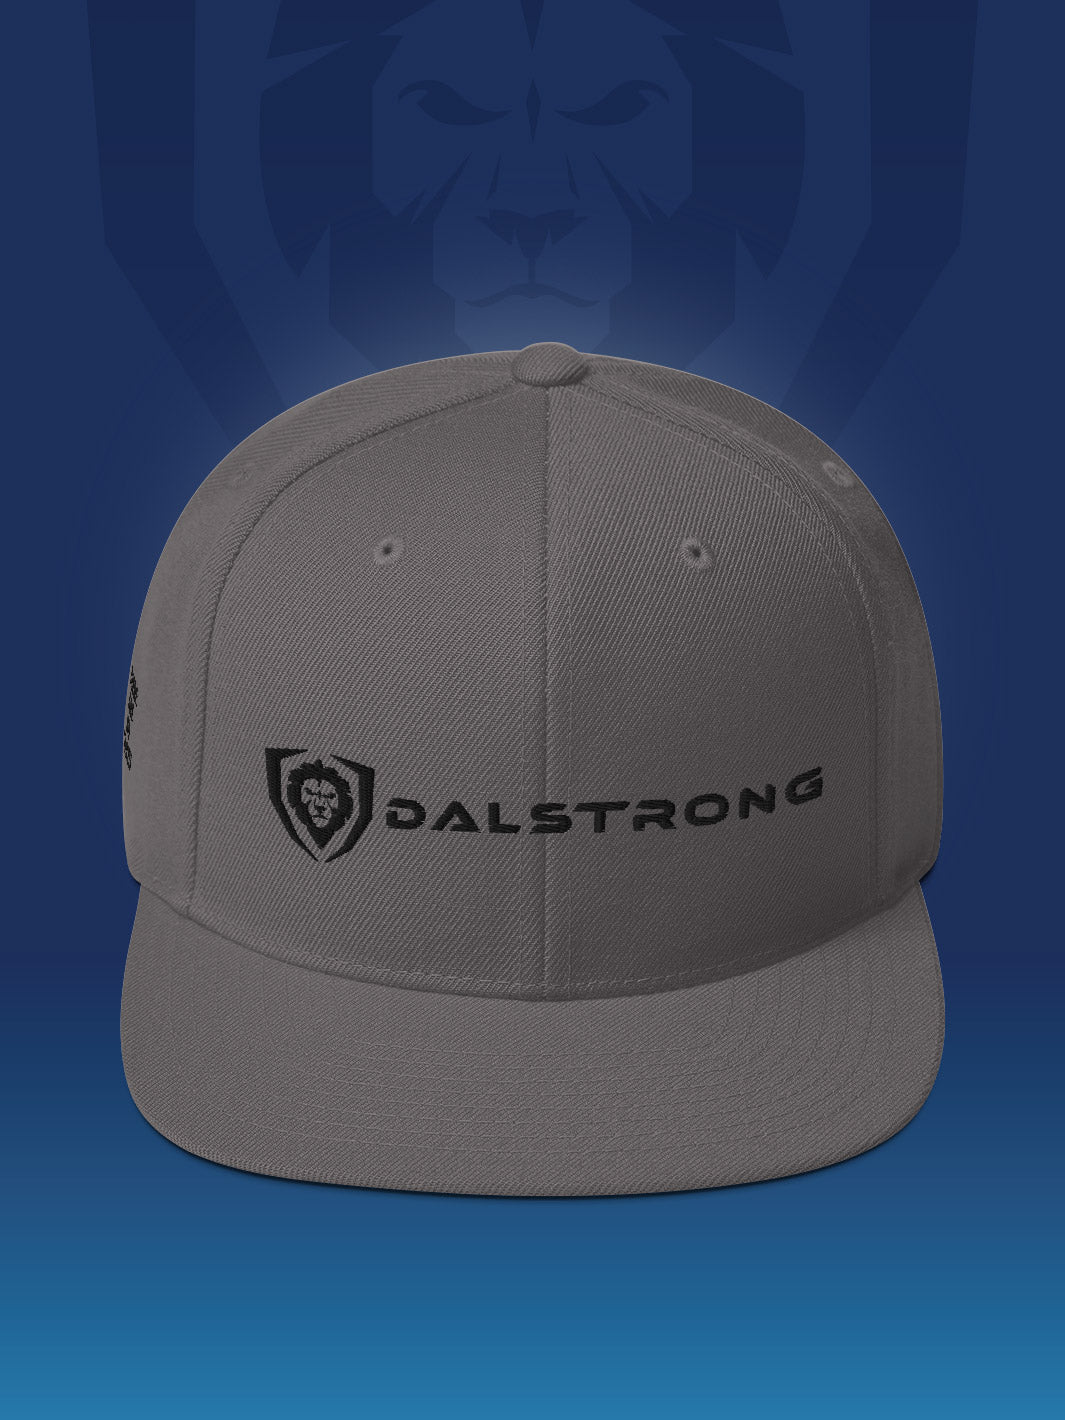 Dalsttrong apparel make it snappy snapback hat dark grey.